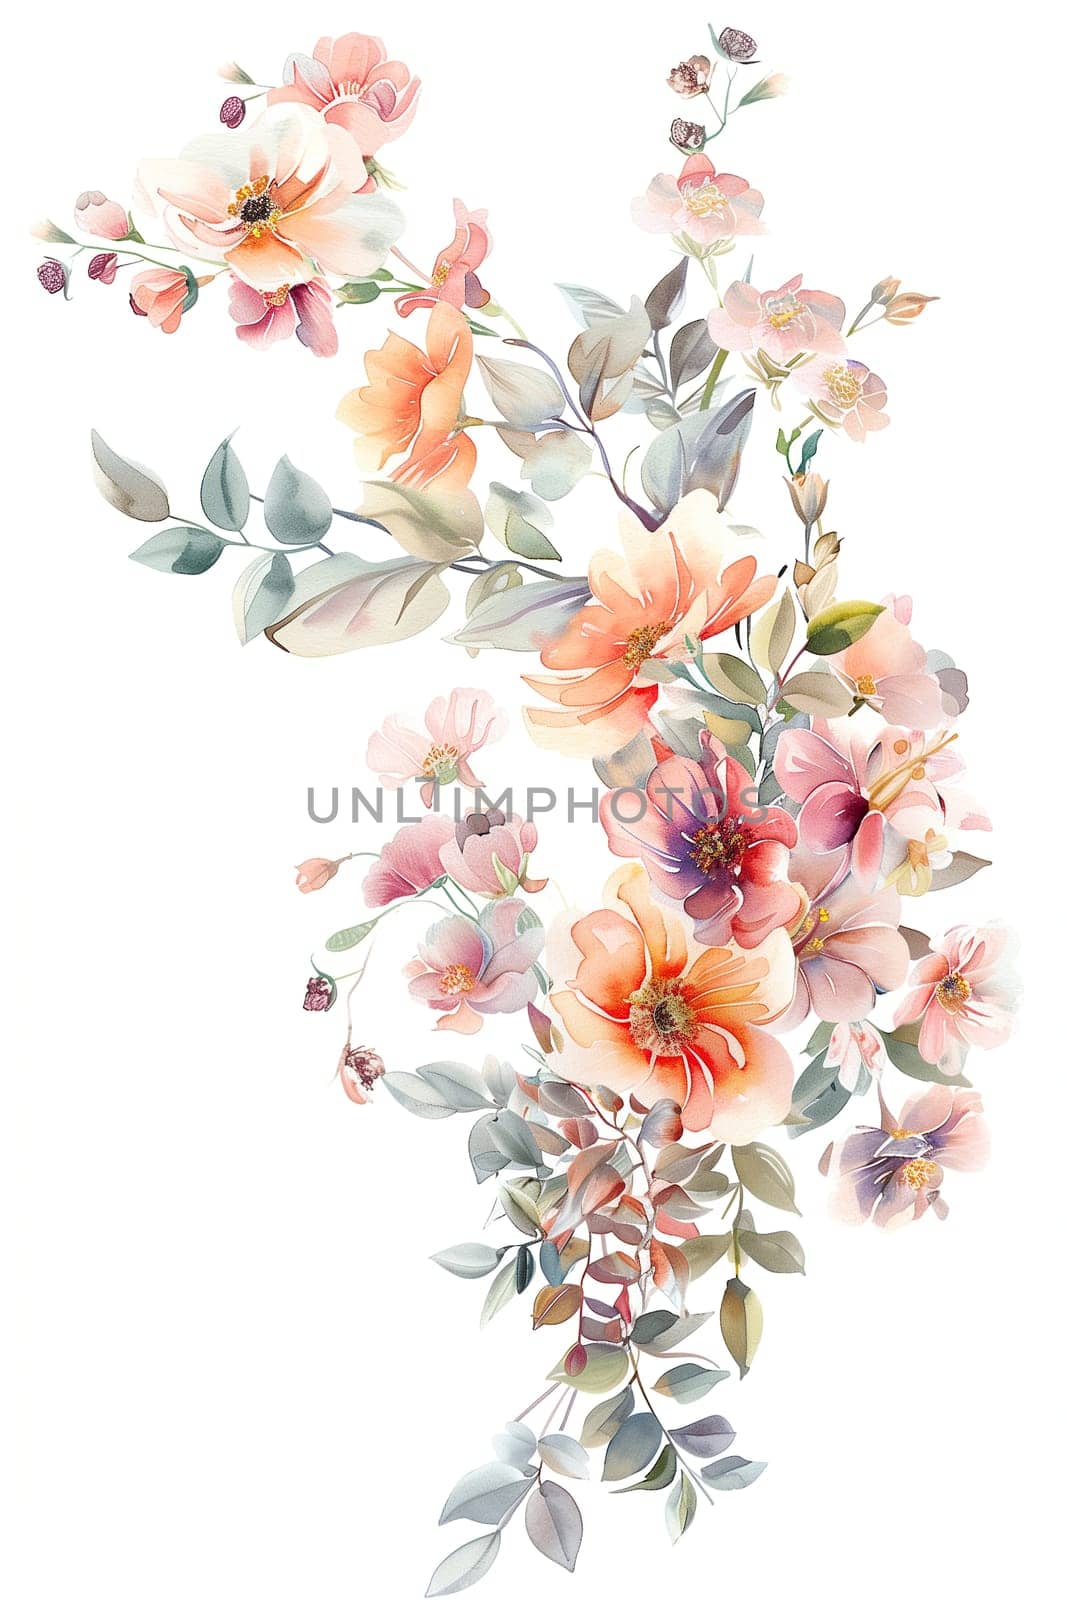 A watercolor painting of a flowery background with a pink flower in the center. Painted watercolor floral border or frame for wedding invitations